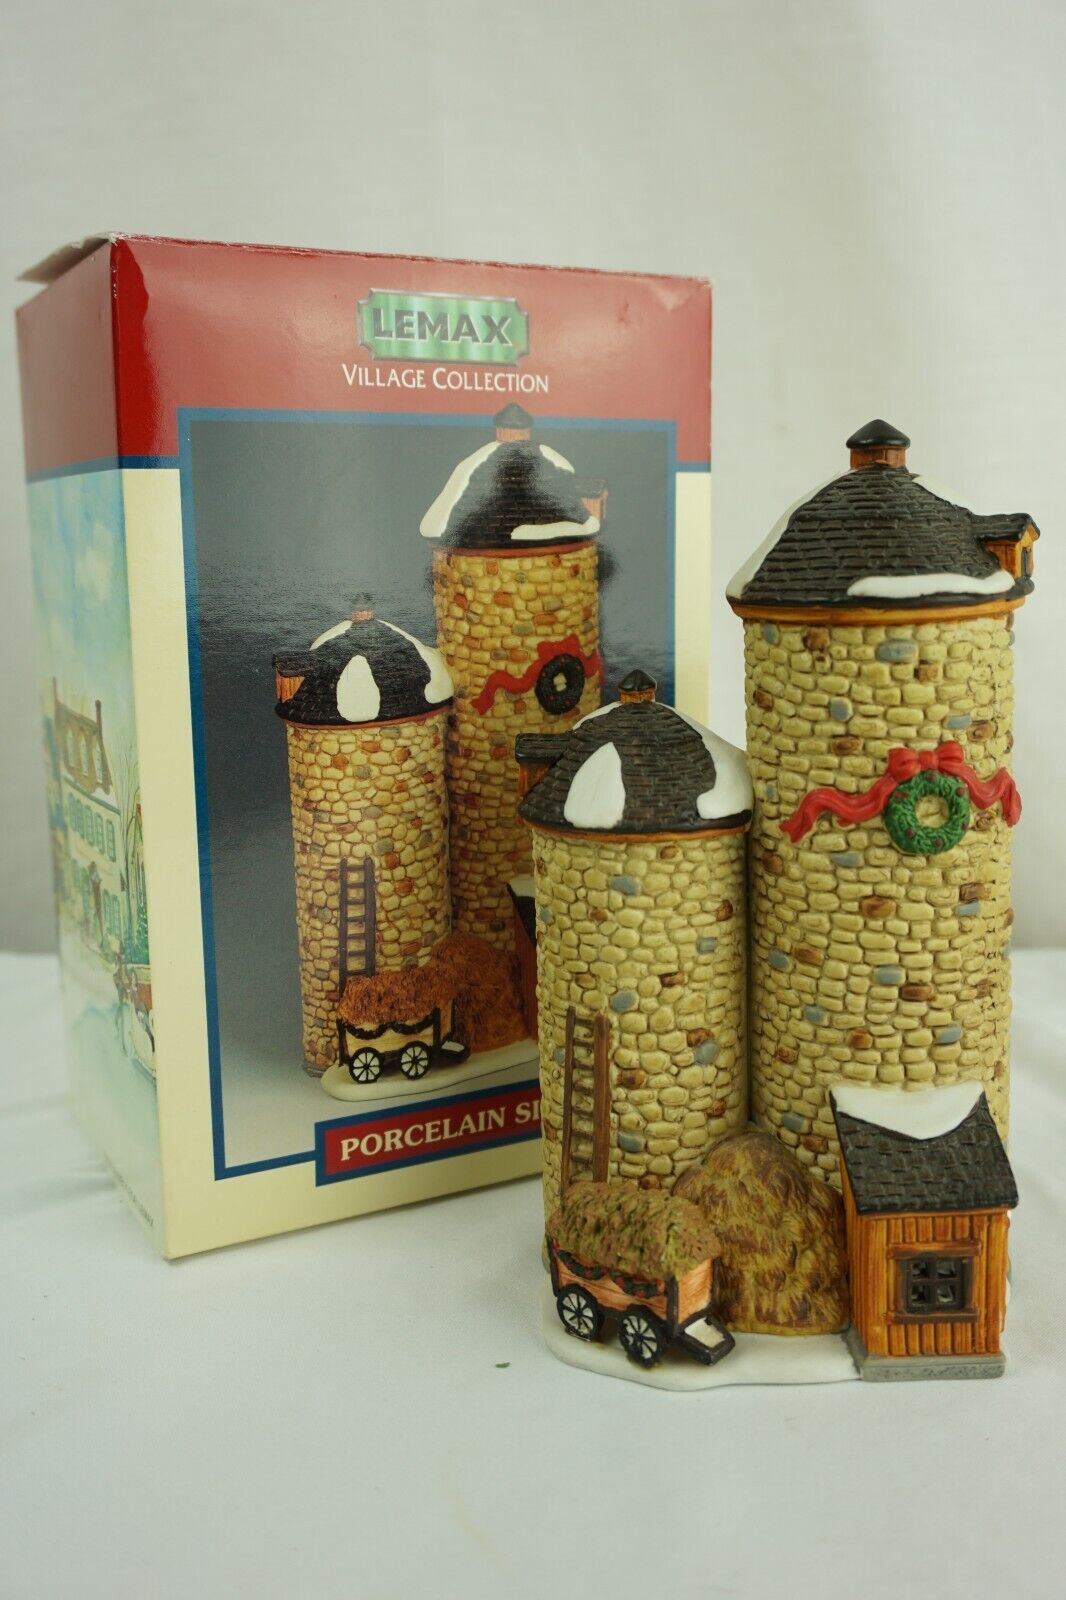 Lemax 1999 Village Collection Porcelain SILO Accessory #94381 Retired 